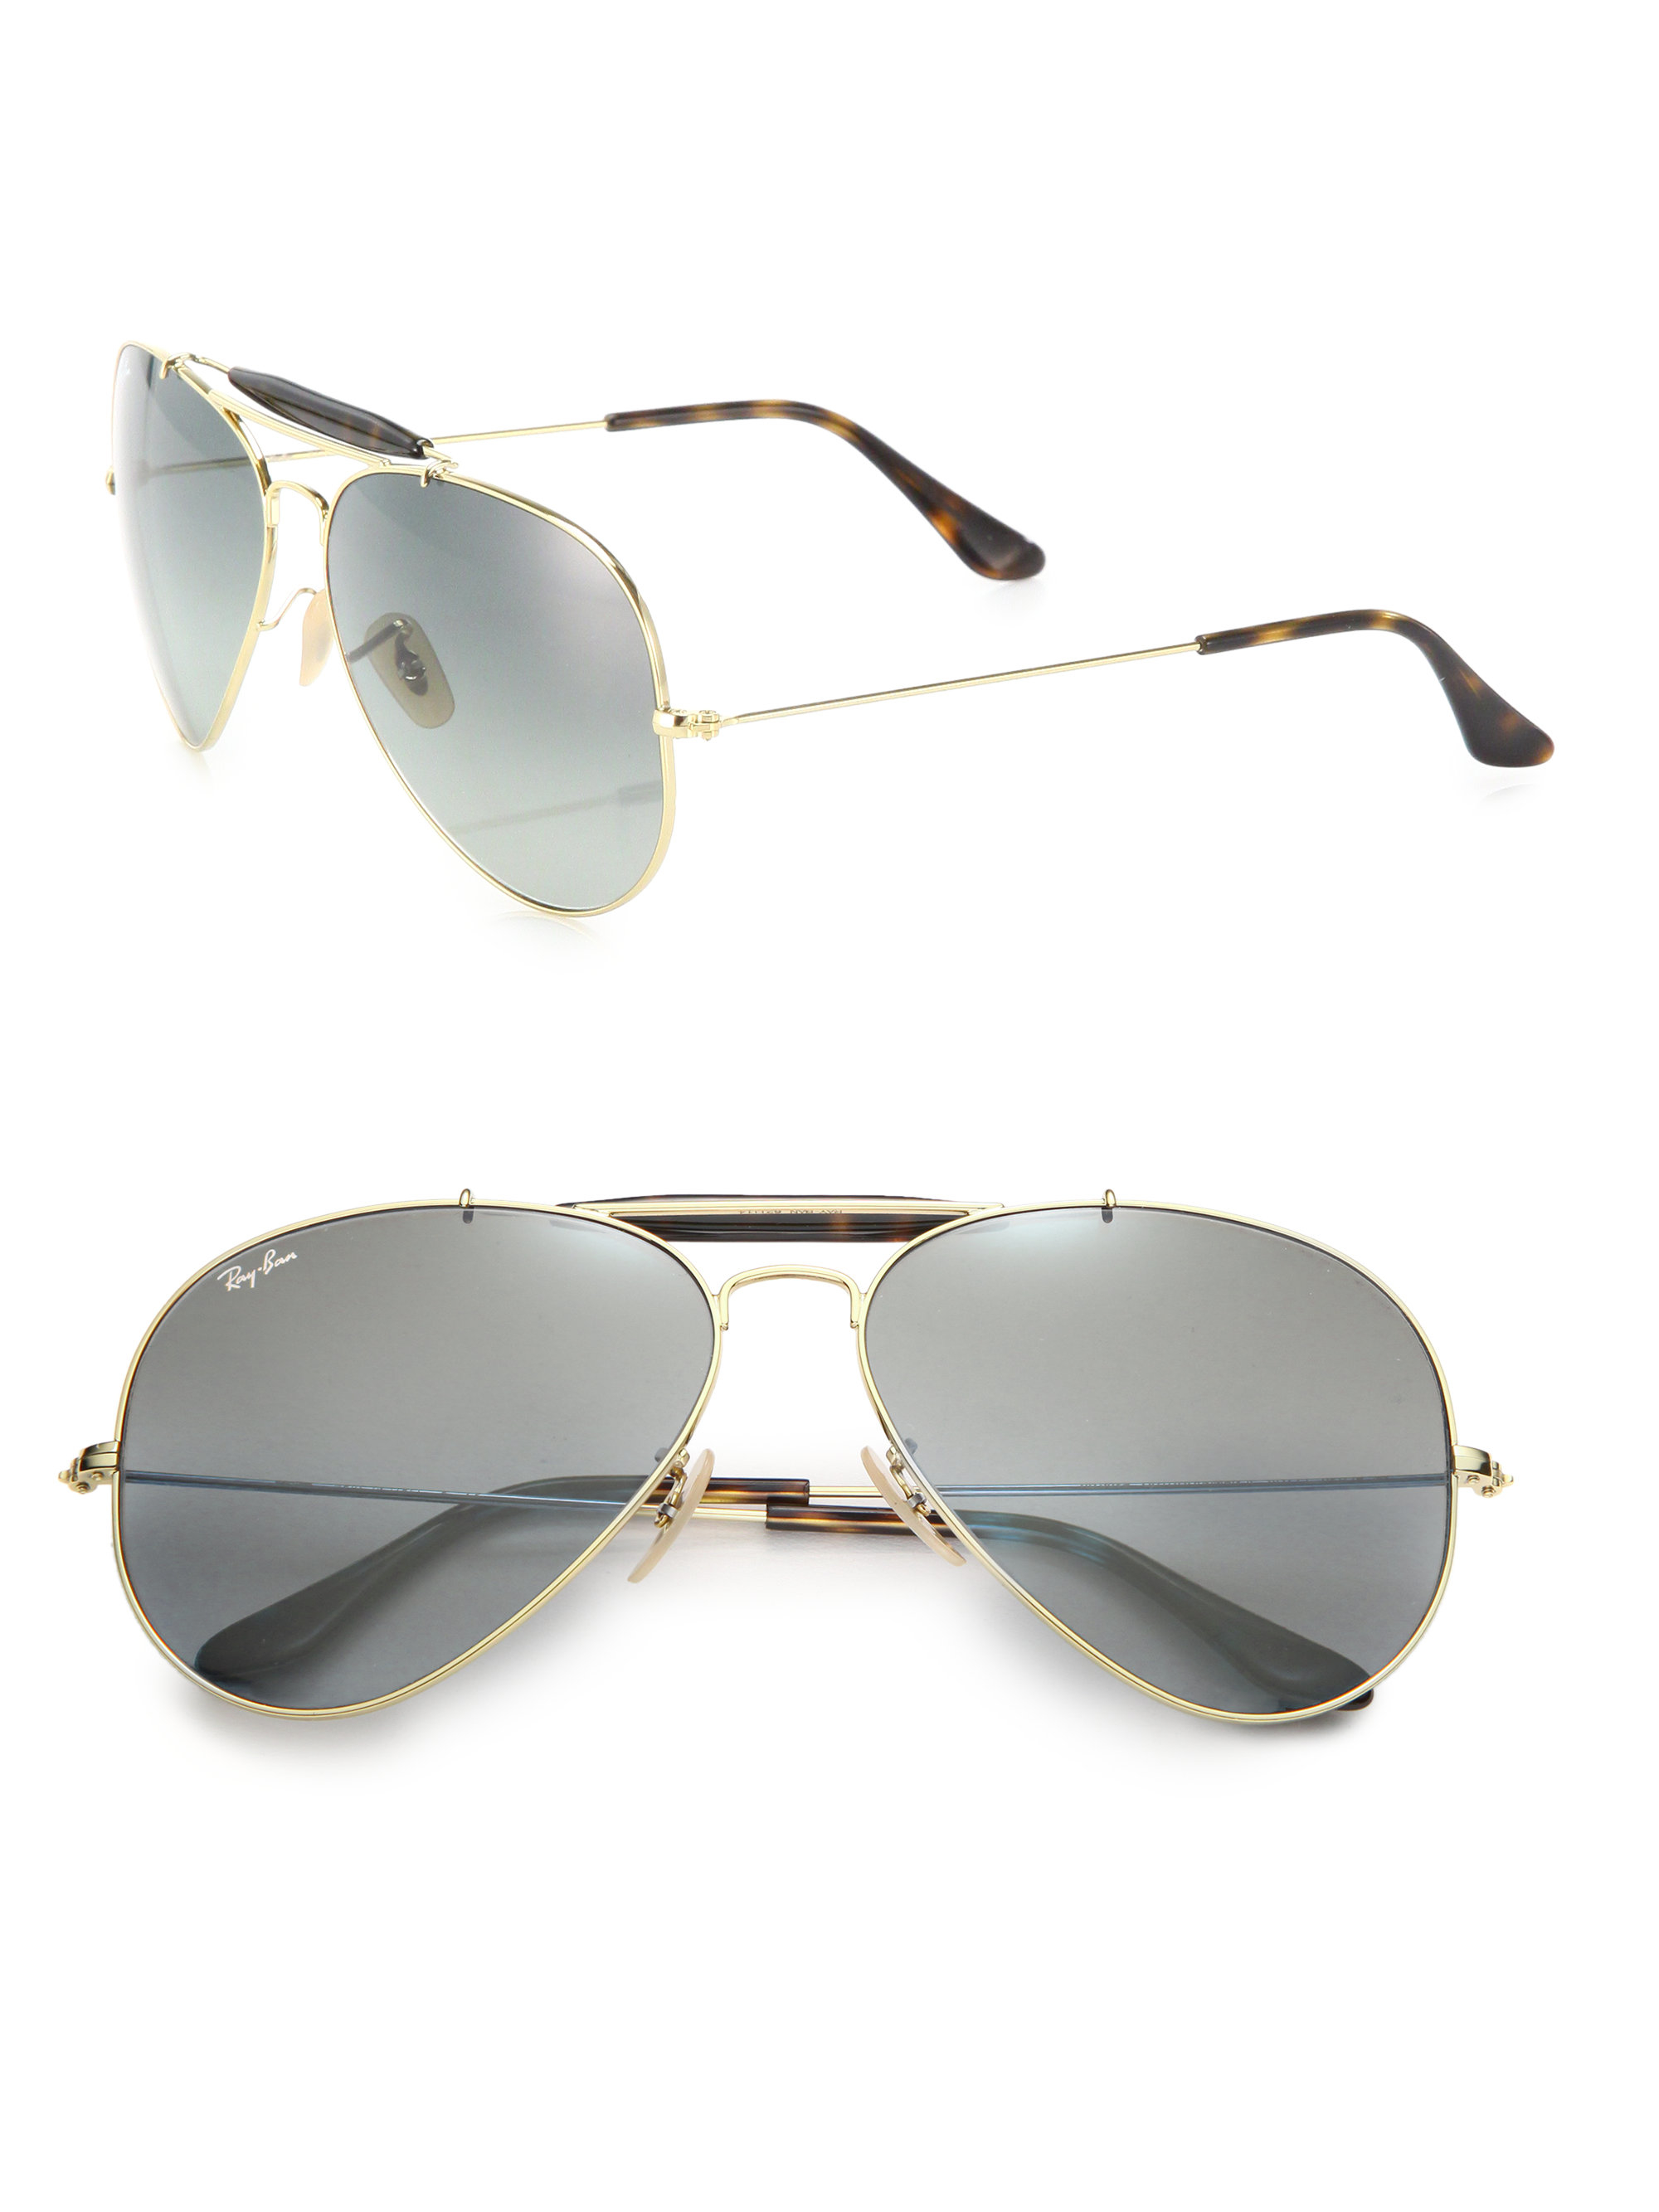 Lyst - Ray-Ban Aviator Sunglasses With Flash Lenses in 